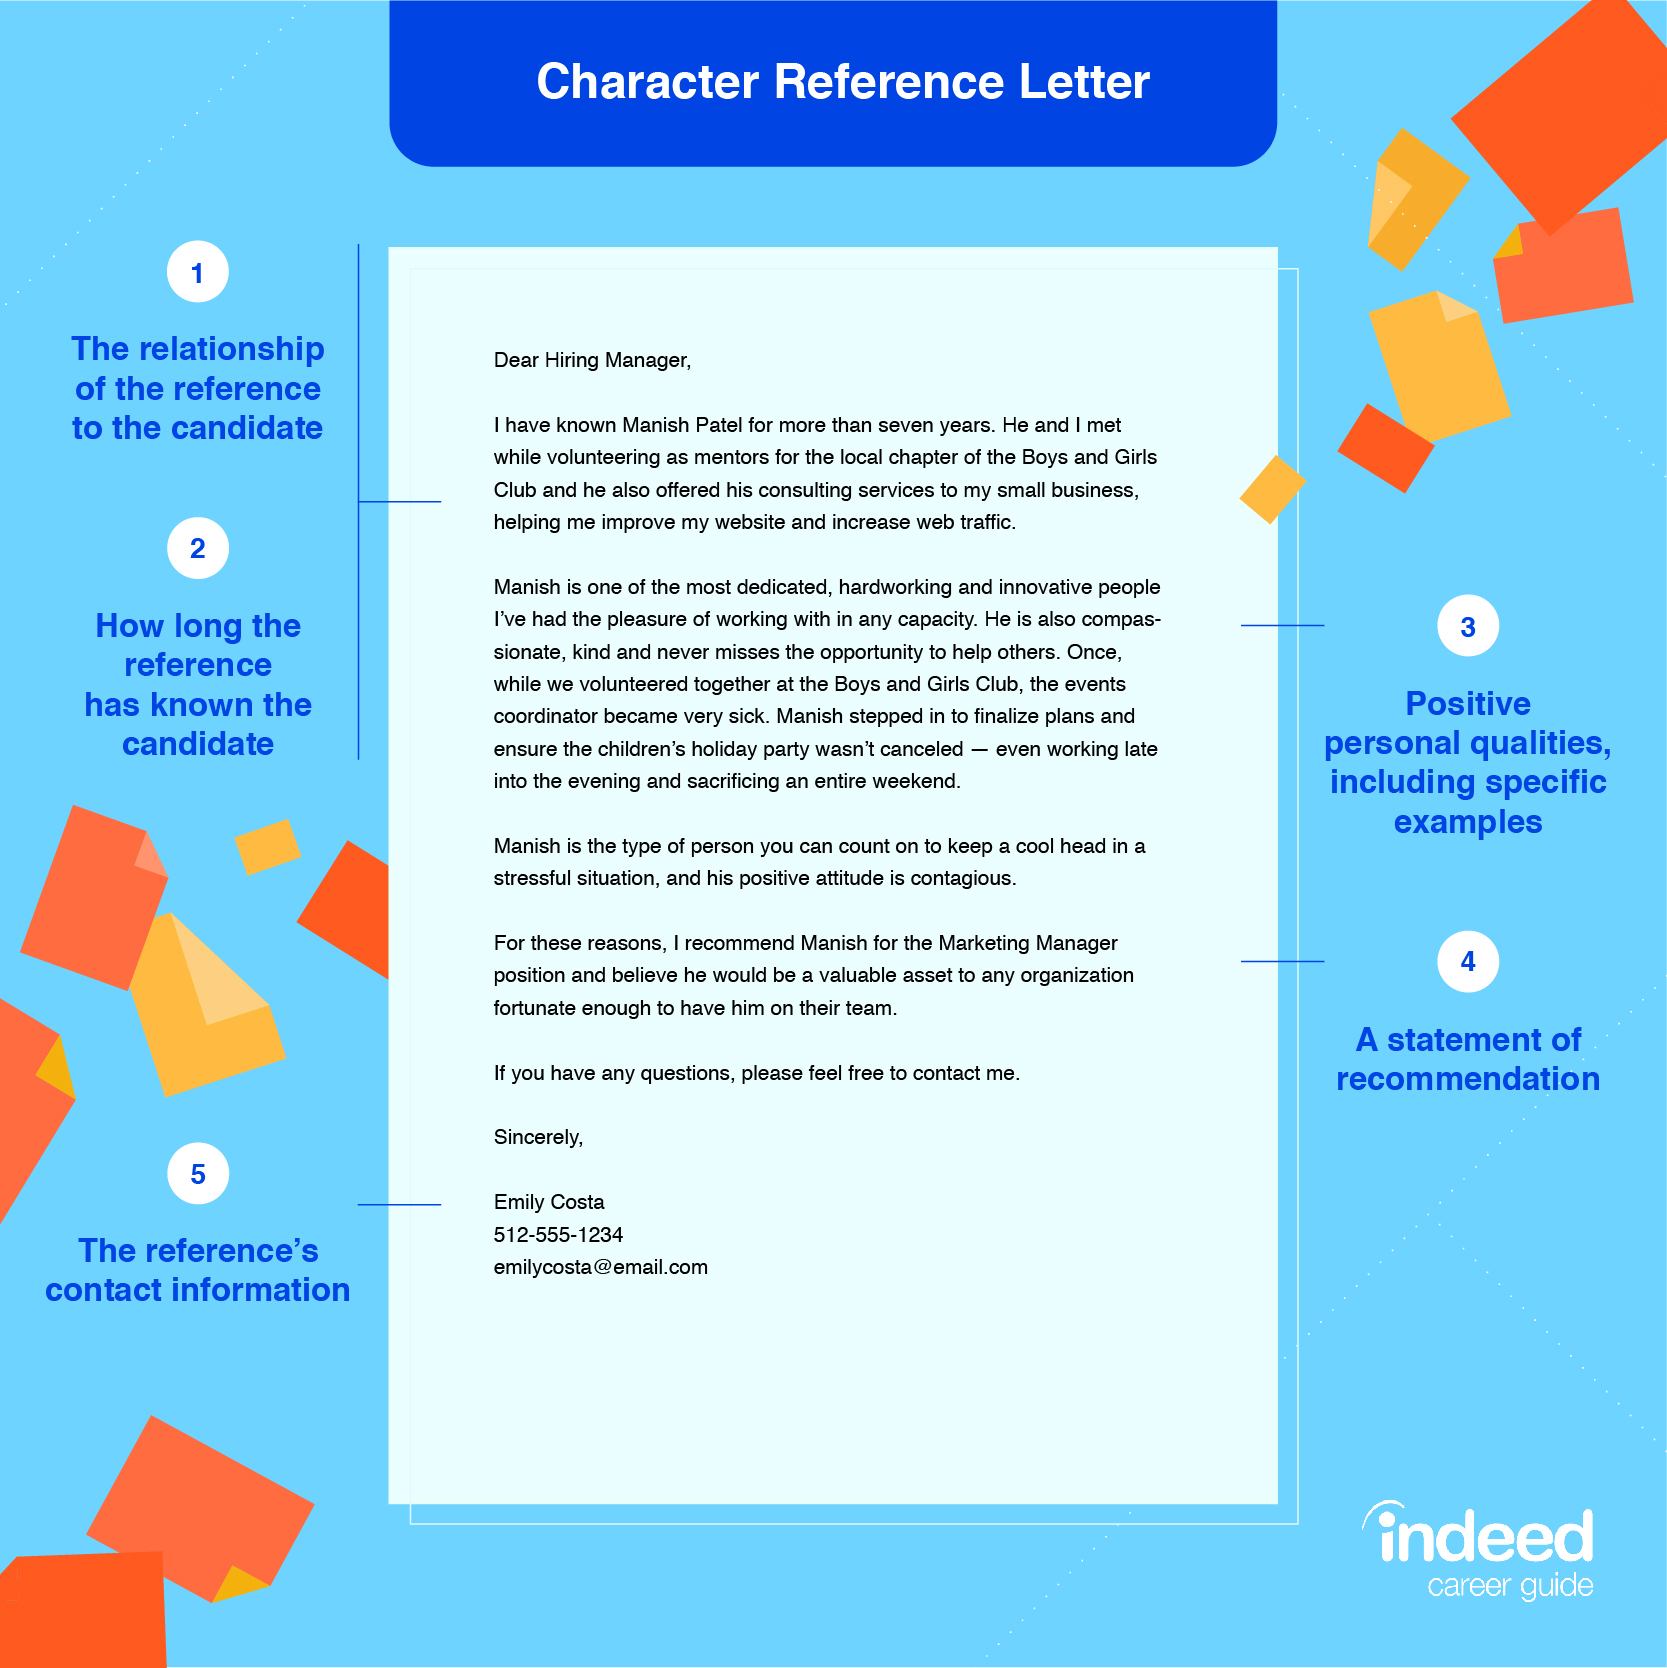 Character Reference Letter Sample And Tips Indeed intended for dimensions 1667 X 1668